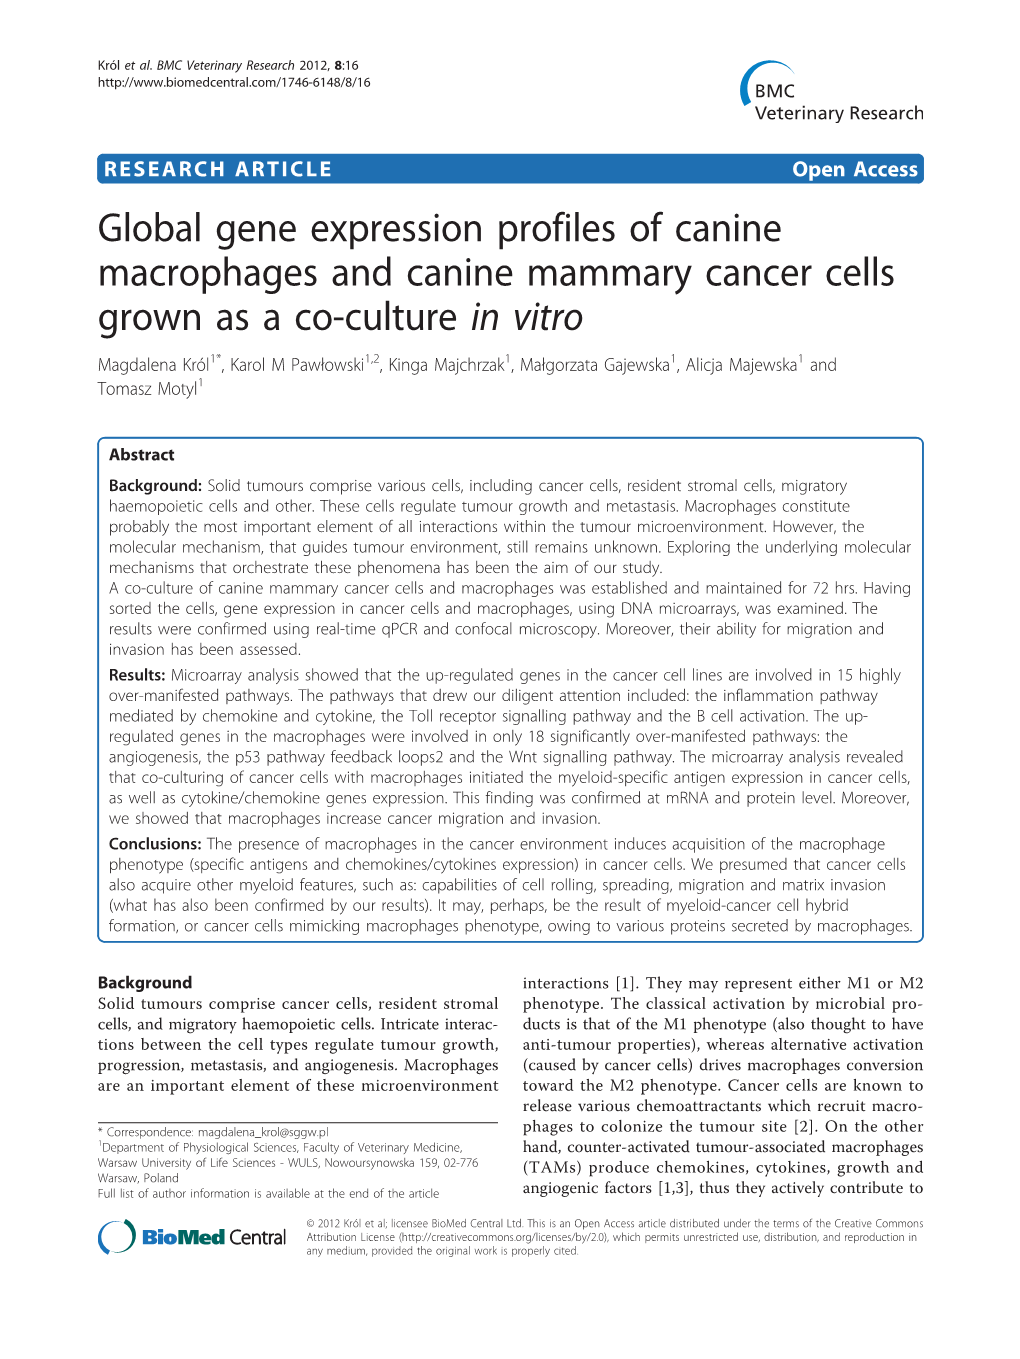 Global Gene Expression Profiles of Canine Macrophages and Canine